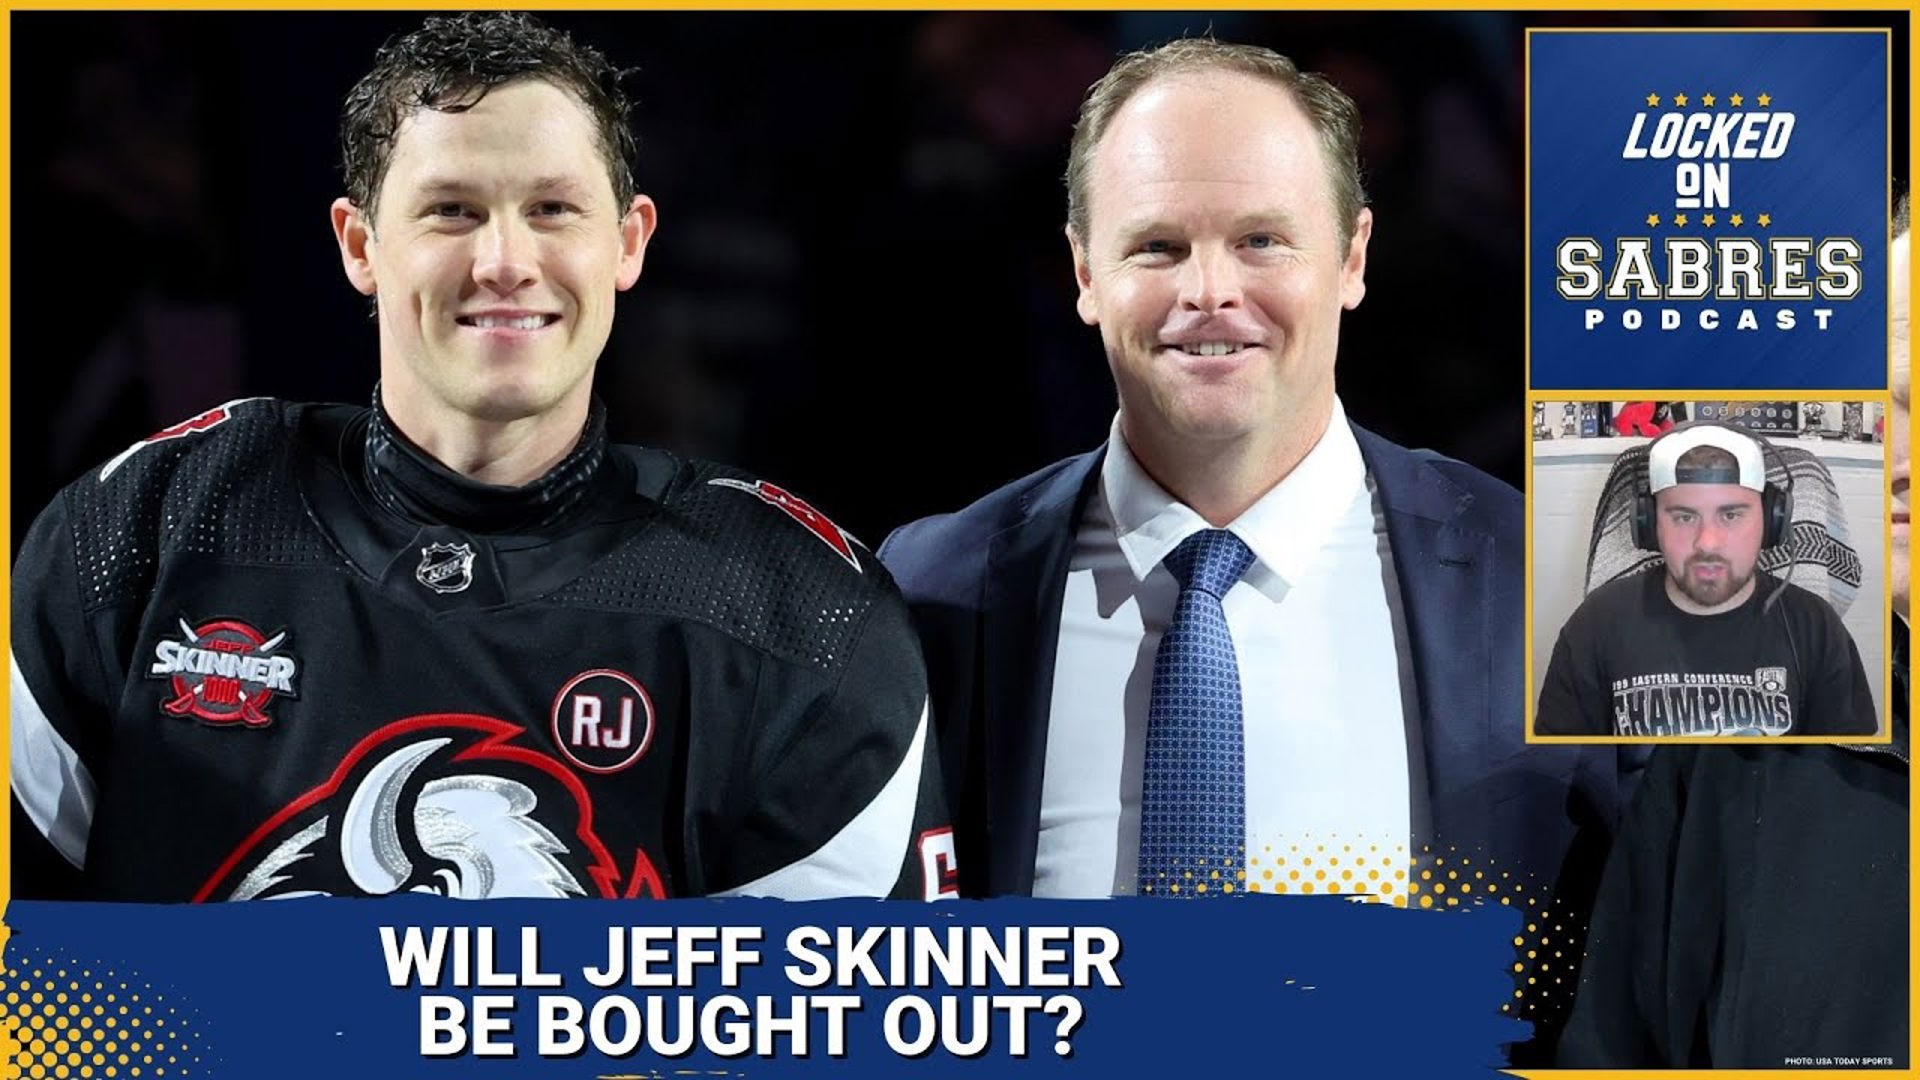 Will Jeff Skinner be bought out by the Sabres?